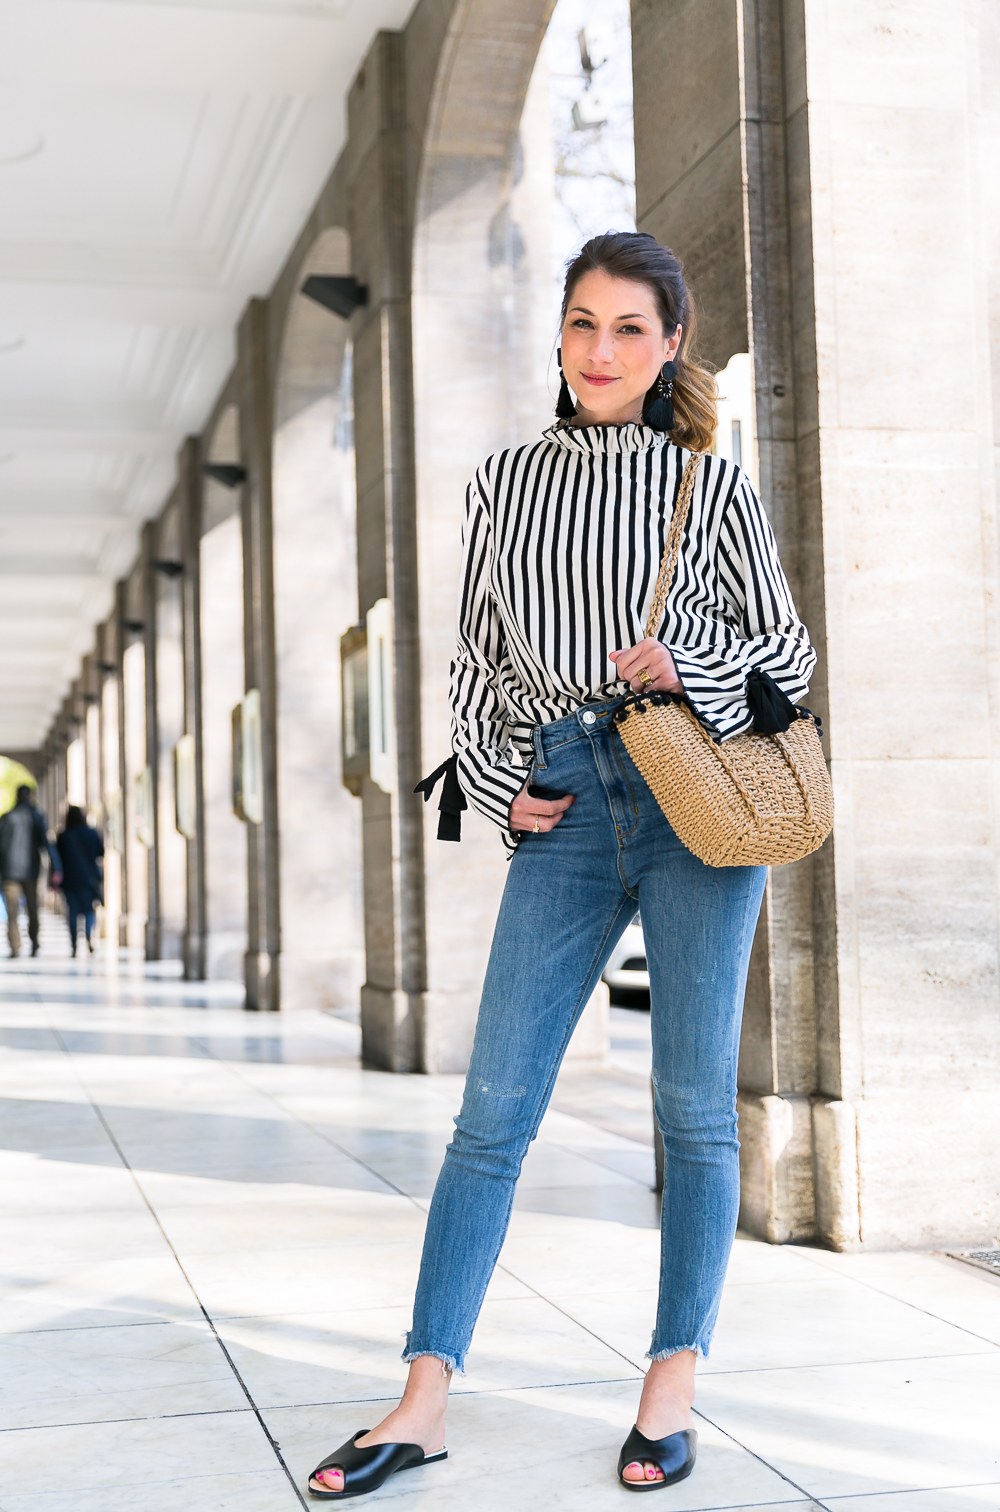 statement sleeves stripes top earrings zara jeans flats basket bag casual chic outfit modeblog